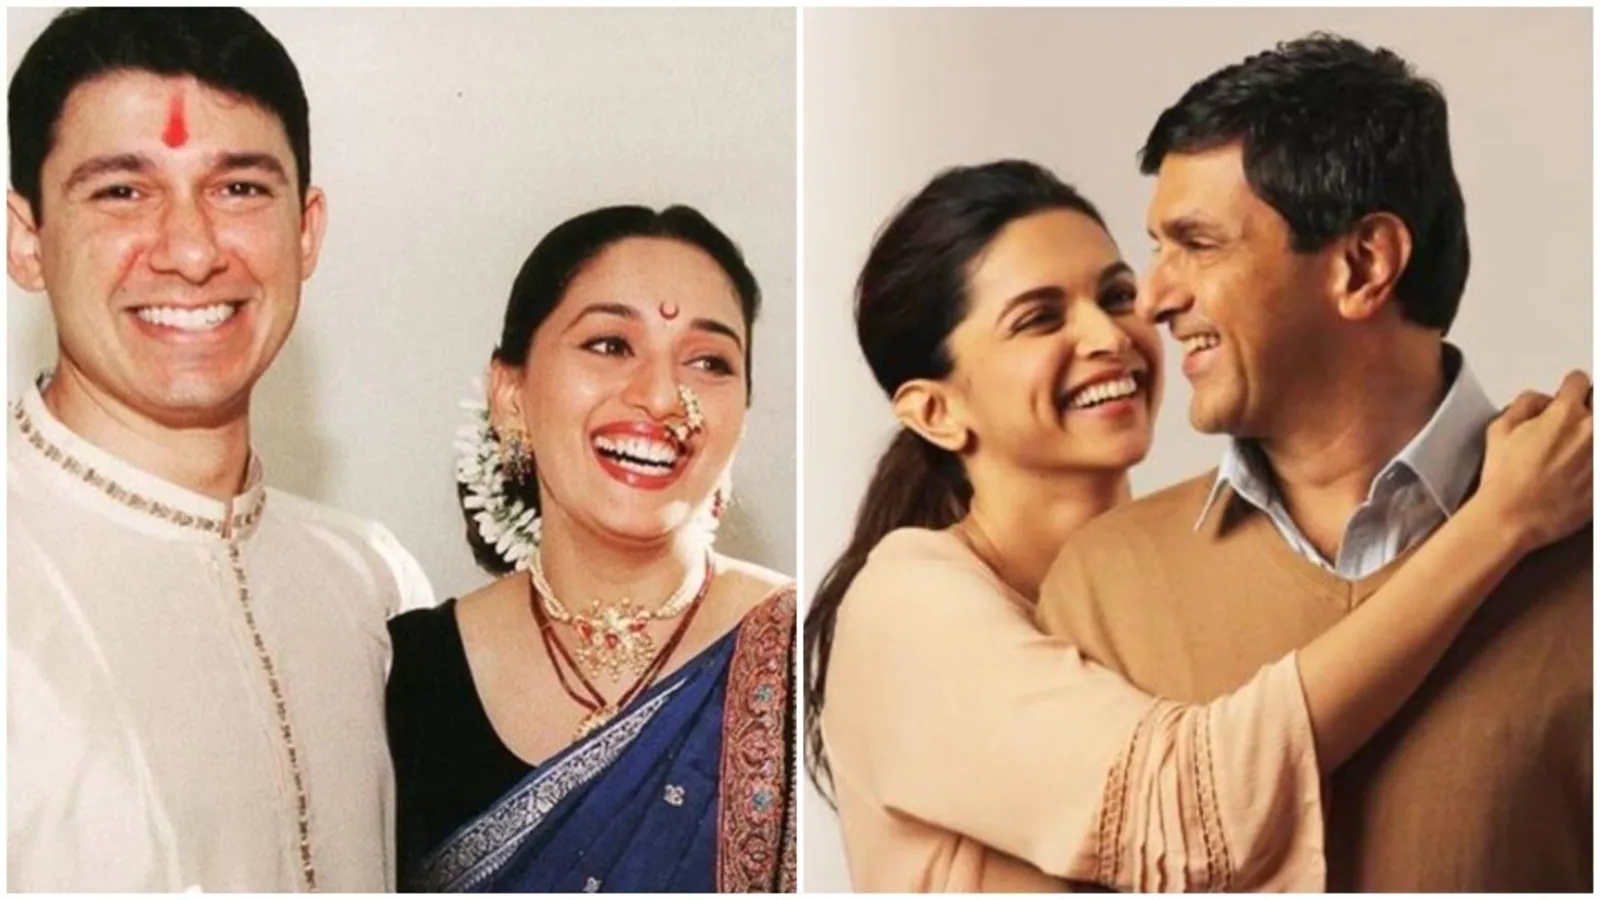 When Deepika Padukone told Madhuri Dixit about dad’s crush, how he locked himself in bathroom when she got married